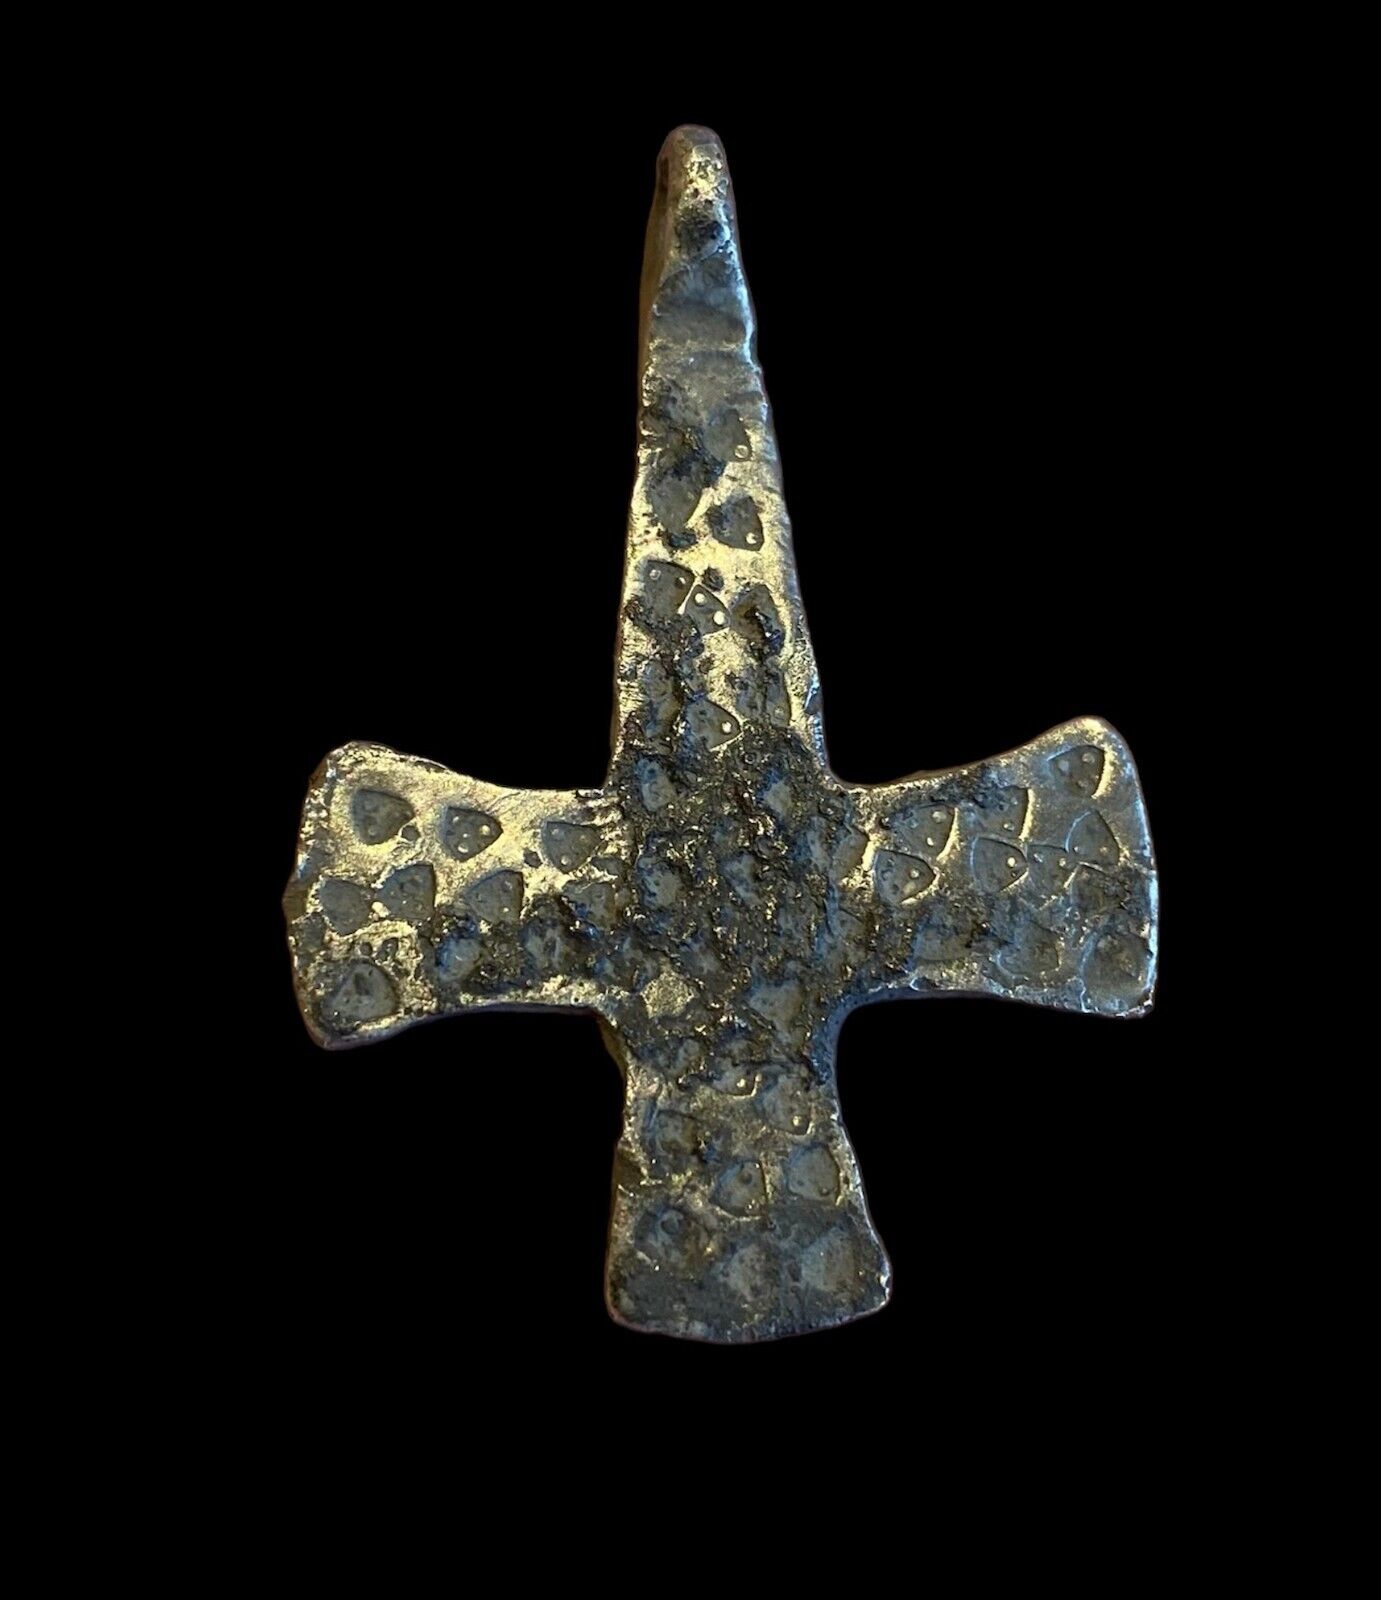 SUPERB ANCIENT VIKING SILVER CROSS PENDANT   DATING 10TH CENTURY AD